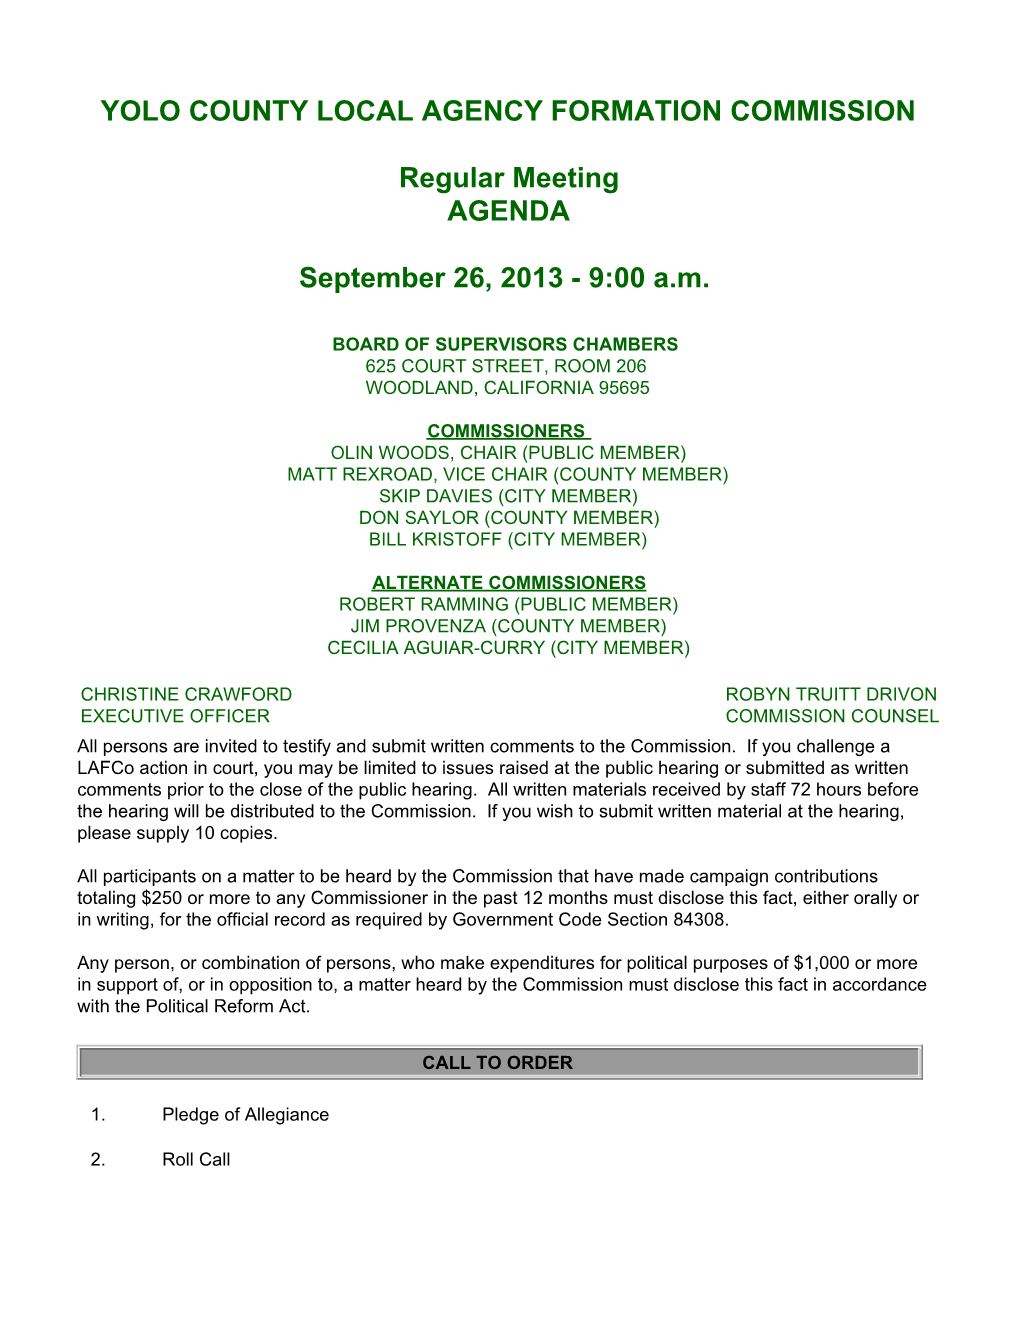 YOLO COUNTY LOCAL AGENCY FORMATION COMMISSION Regular Meeting AGENDA September 26, 2013